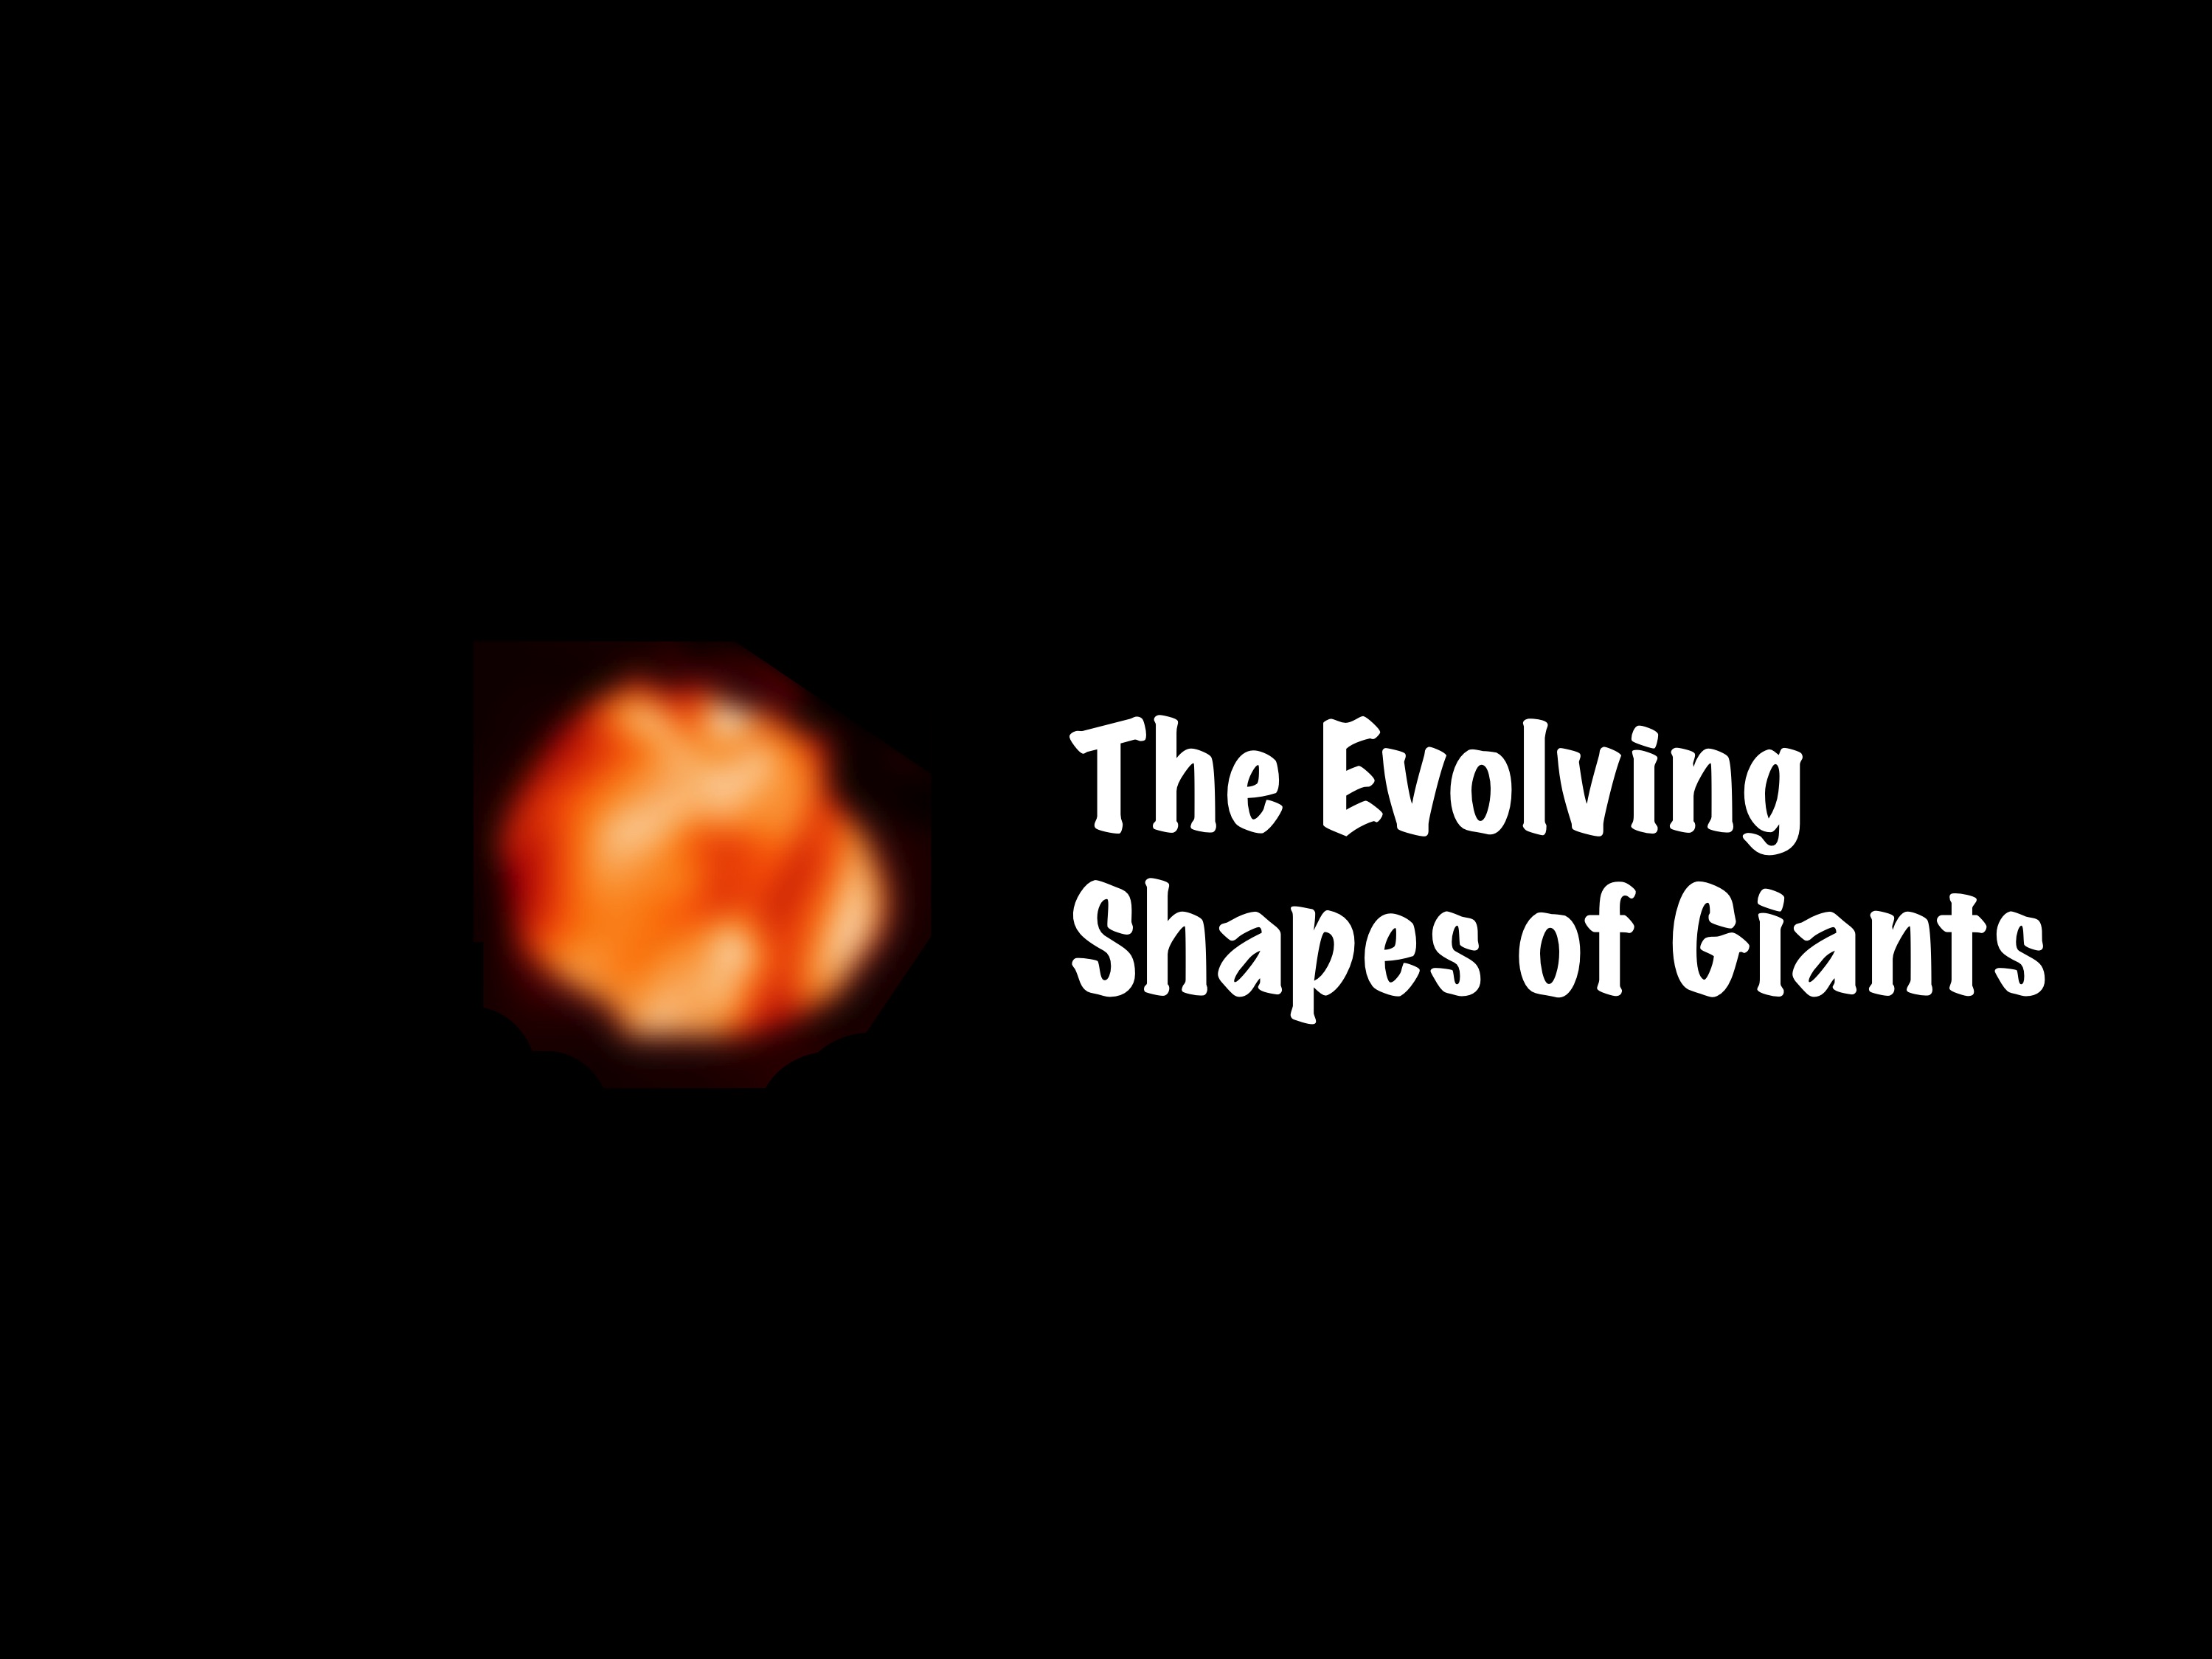 Podcast 4: The Evolving Shapes of Giants